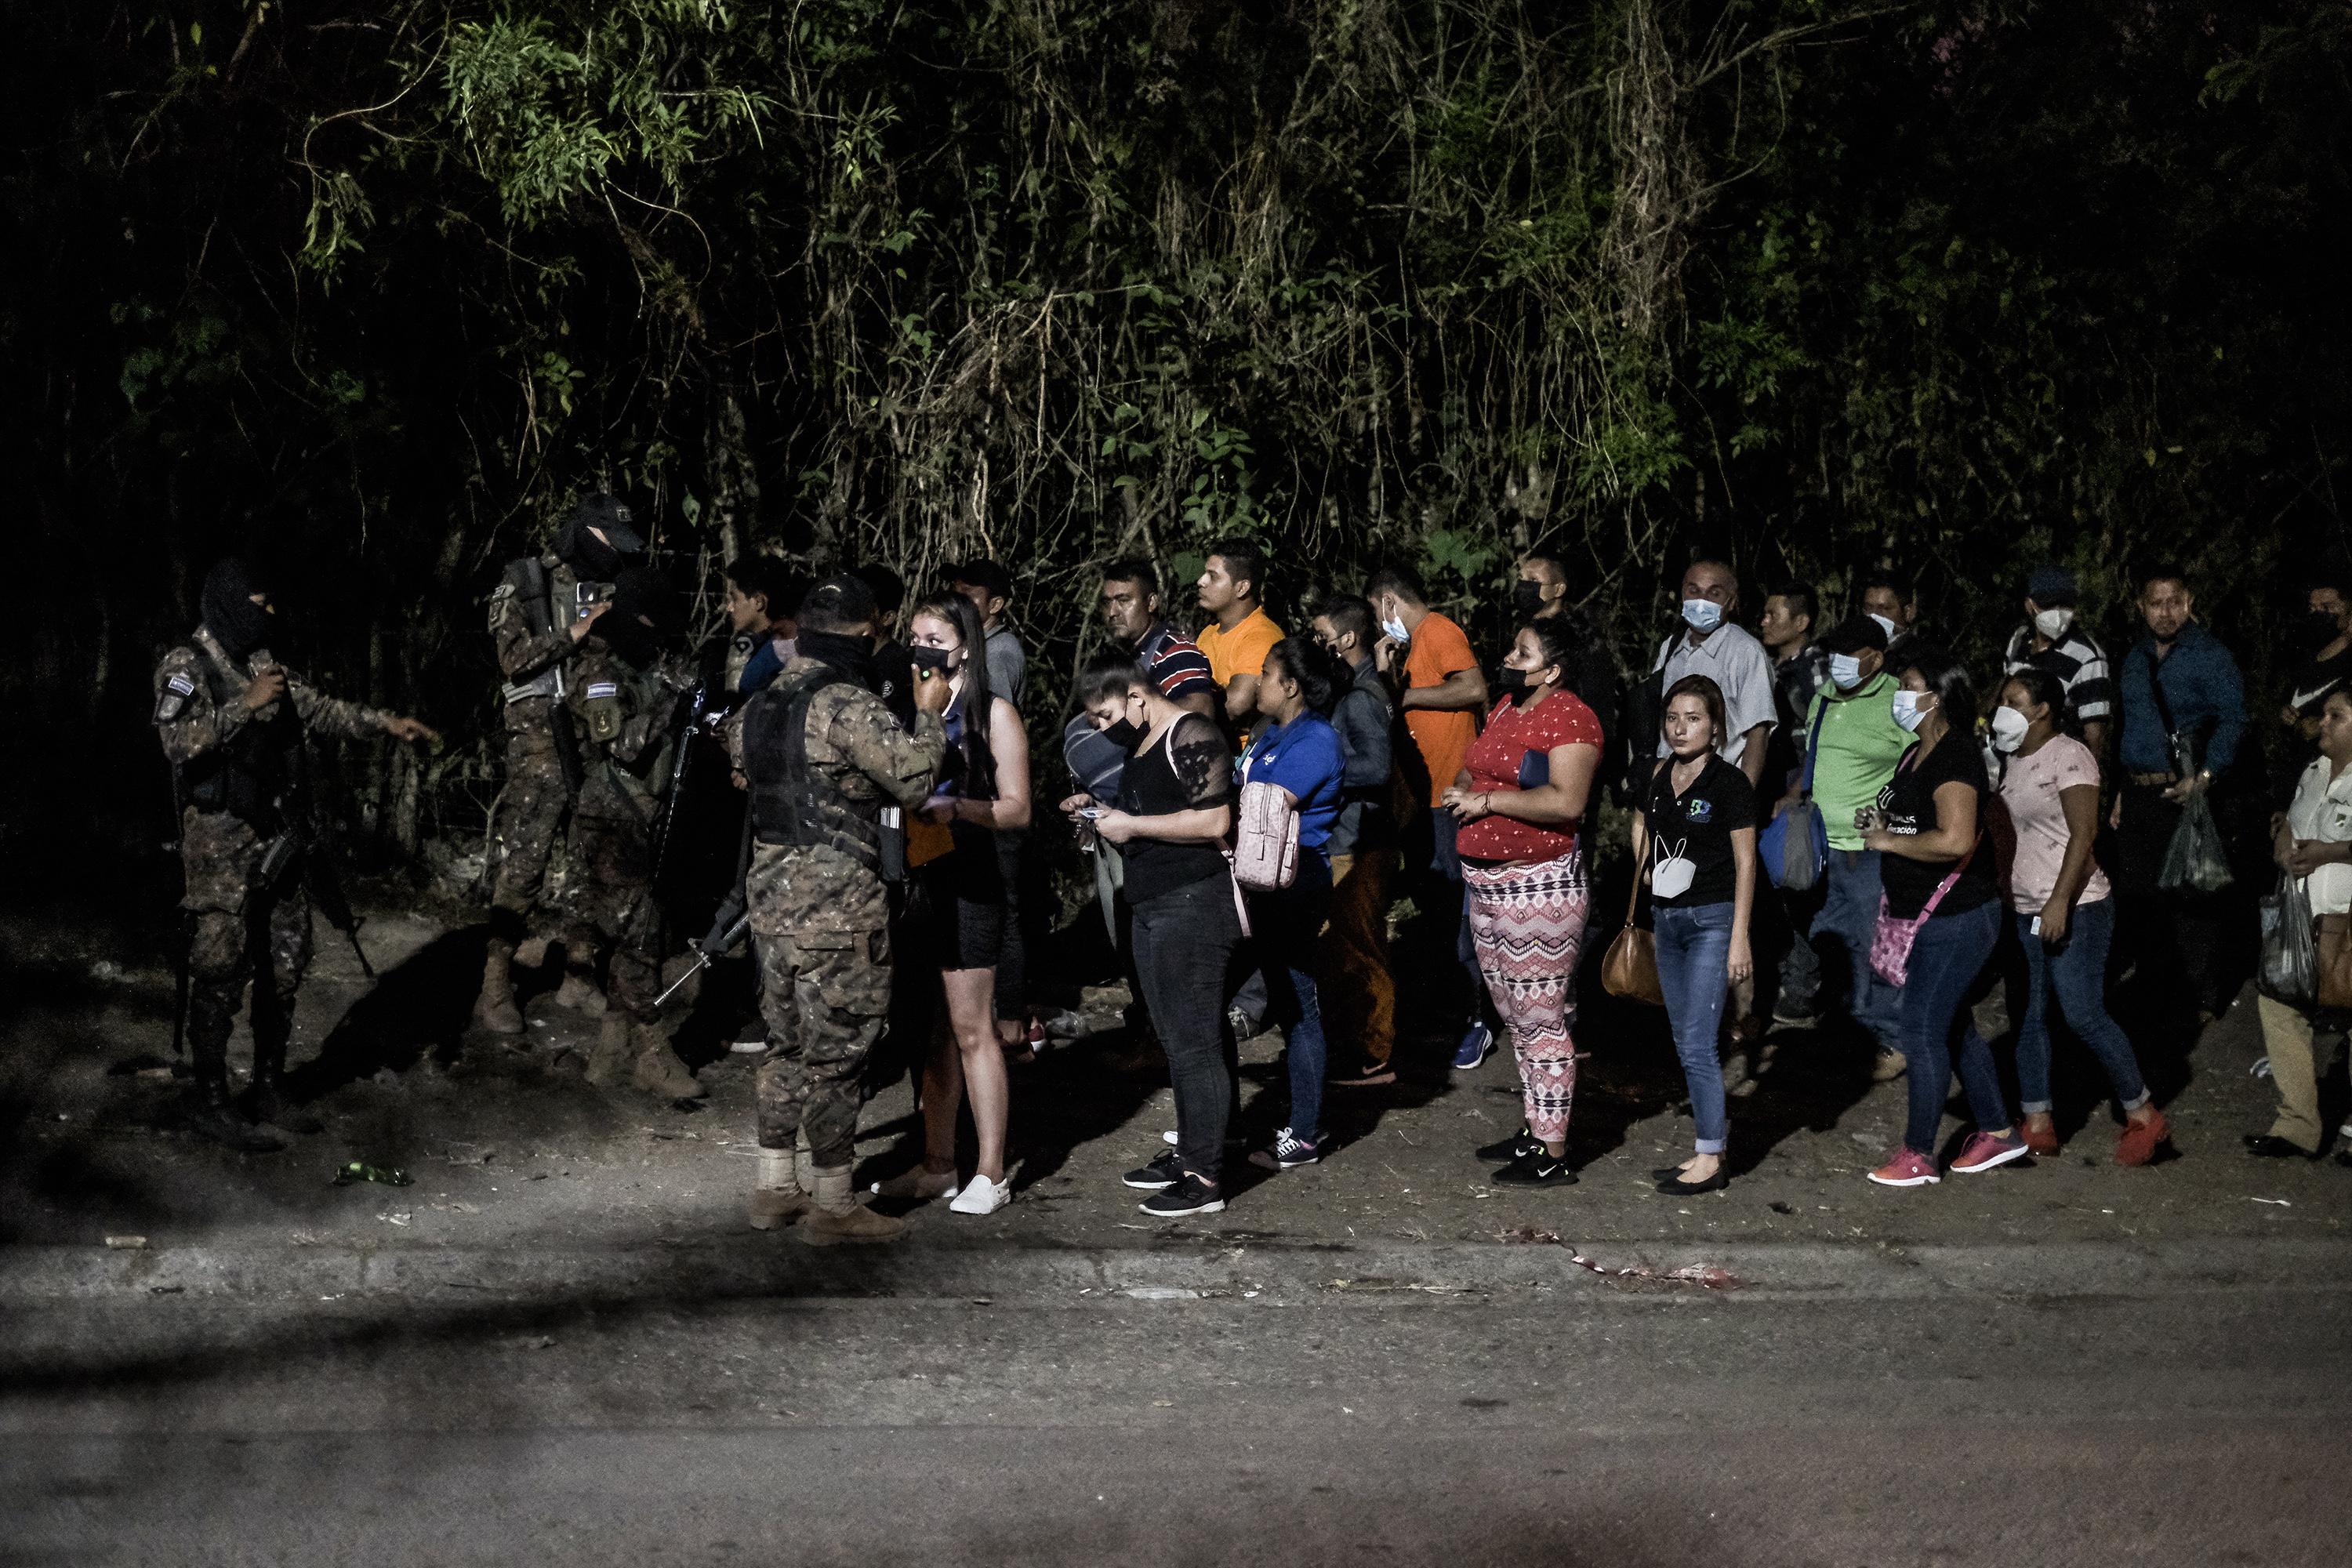 Soldiers inspect residents of Distrito Italia, Tonacatepeque, before letting them enter their neighborhood in April 2022. Photo: Carlos Barrera/El Faro